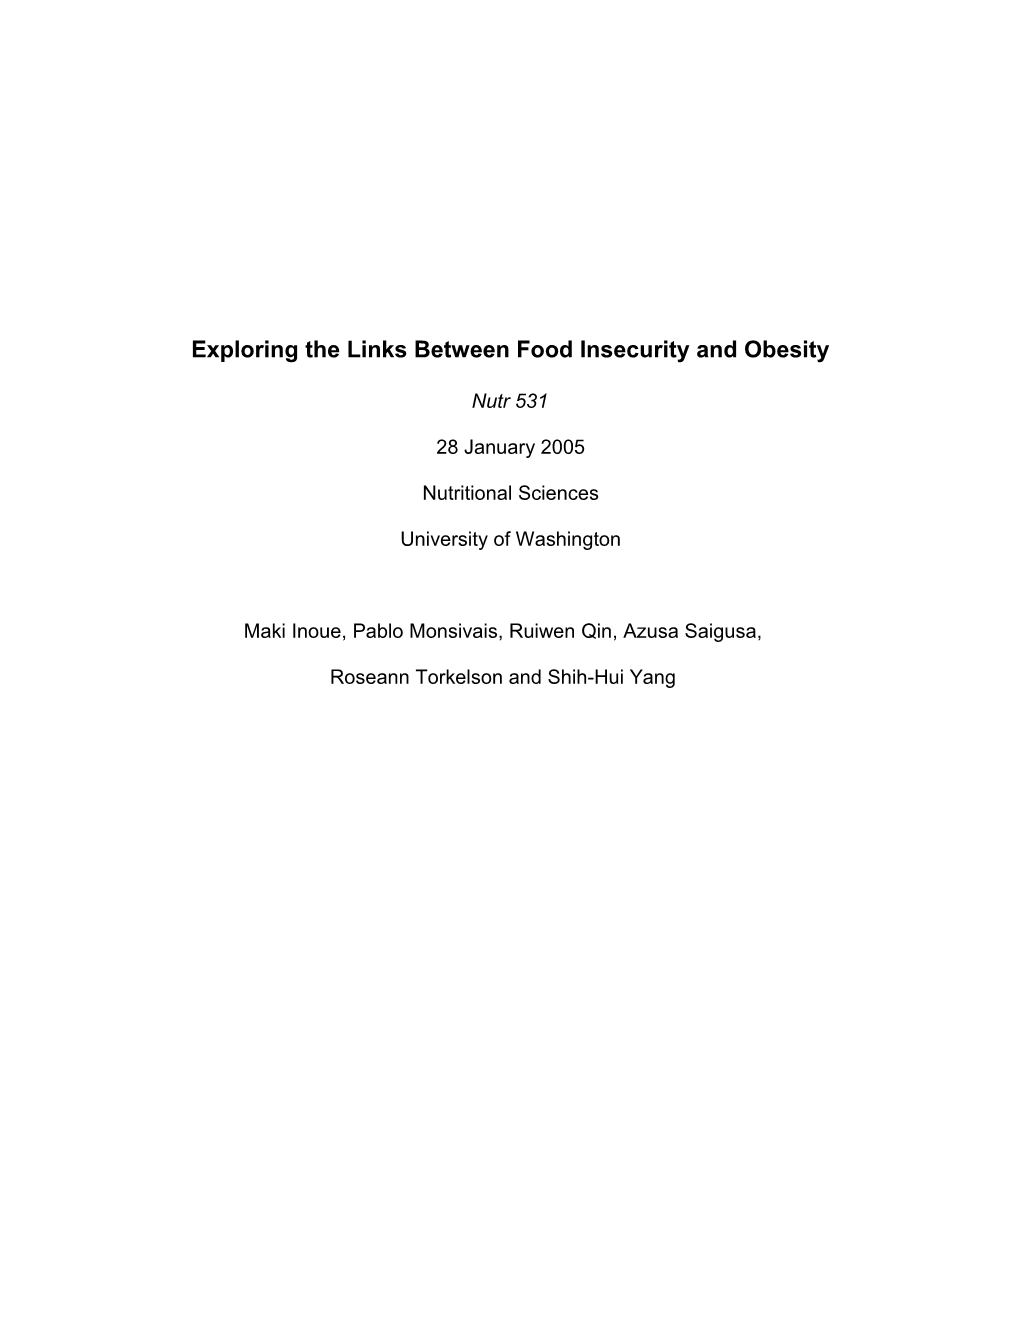 Overview of Food Insecurity and Overweight/Obesity